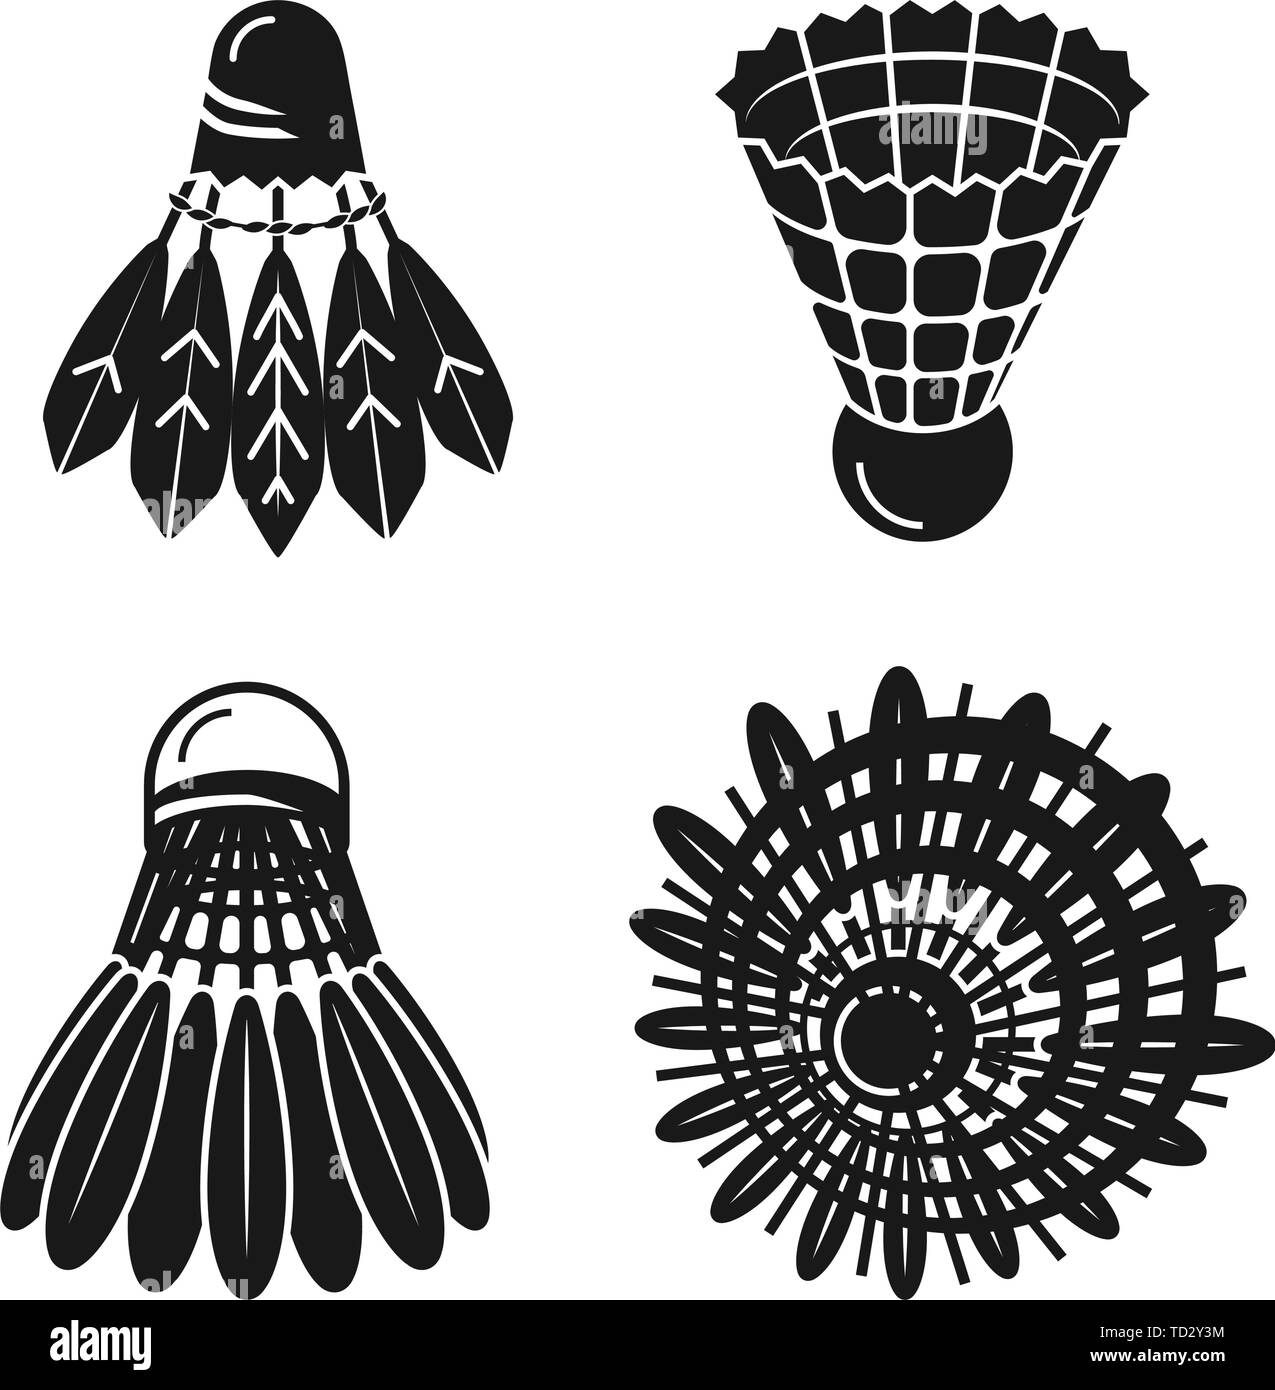 How to draw a Shuttlecock step by step - YouTube